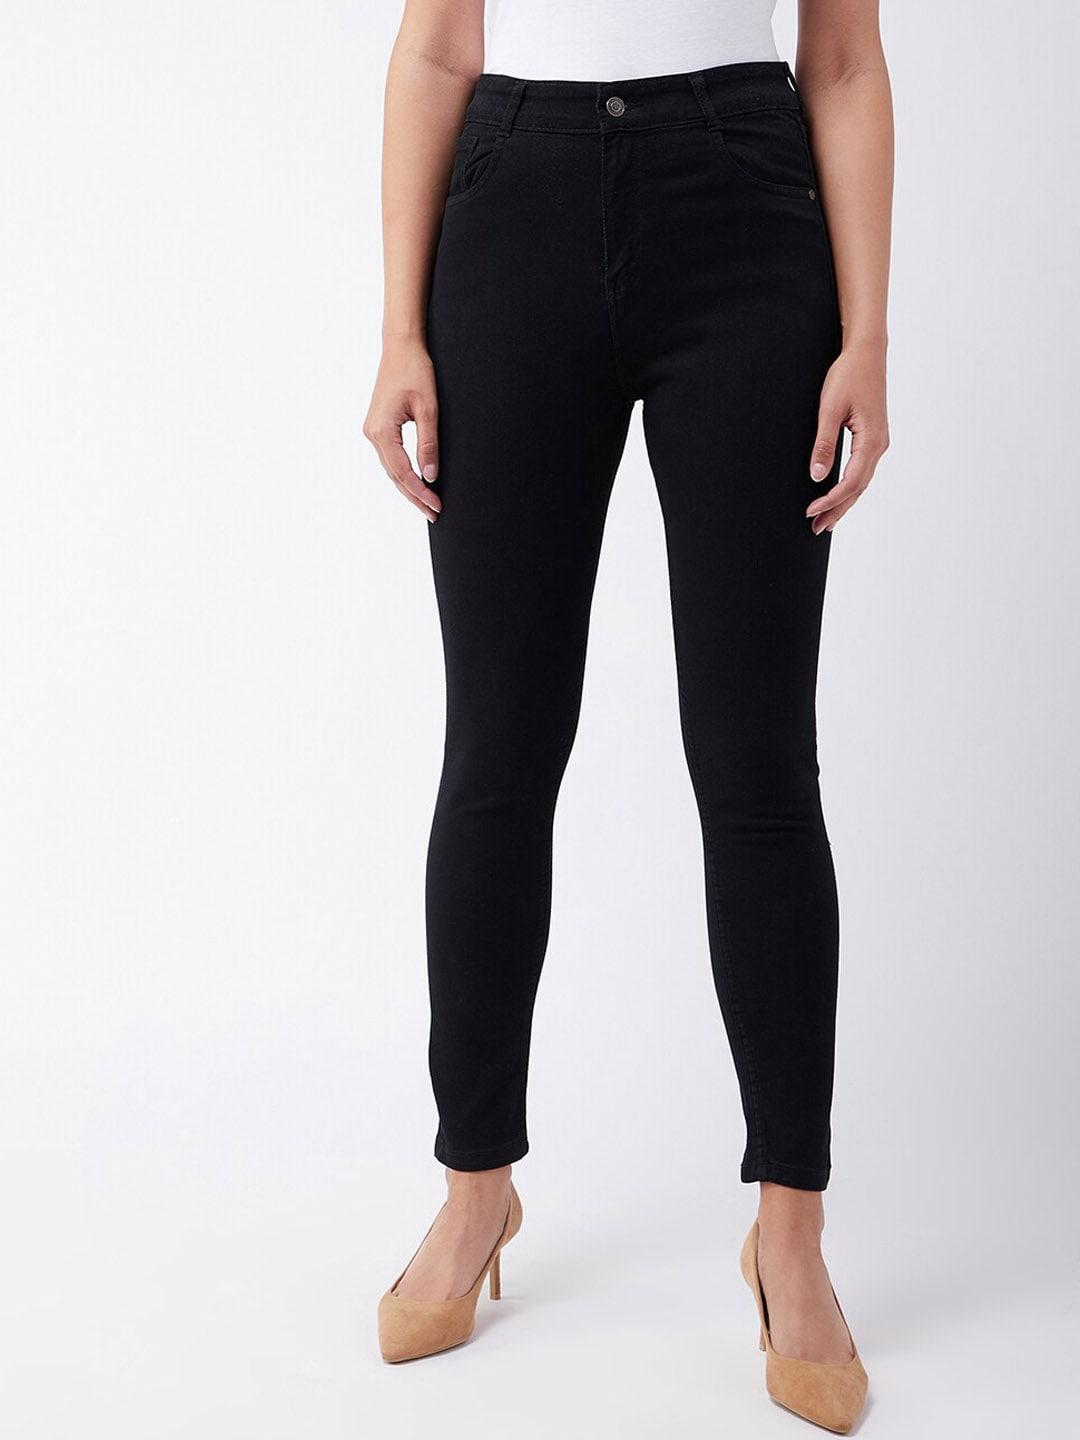 miss-chase-women-black-skinny-fit-high-rise-jeans